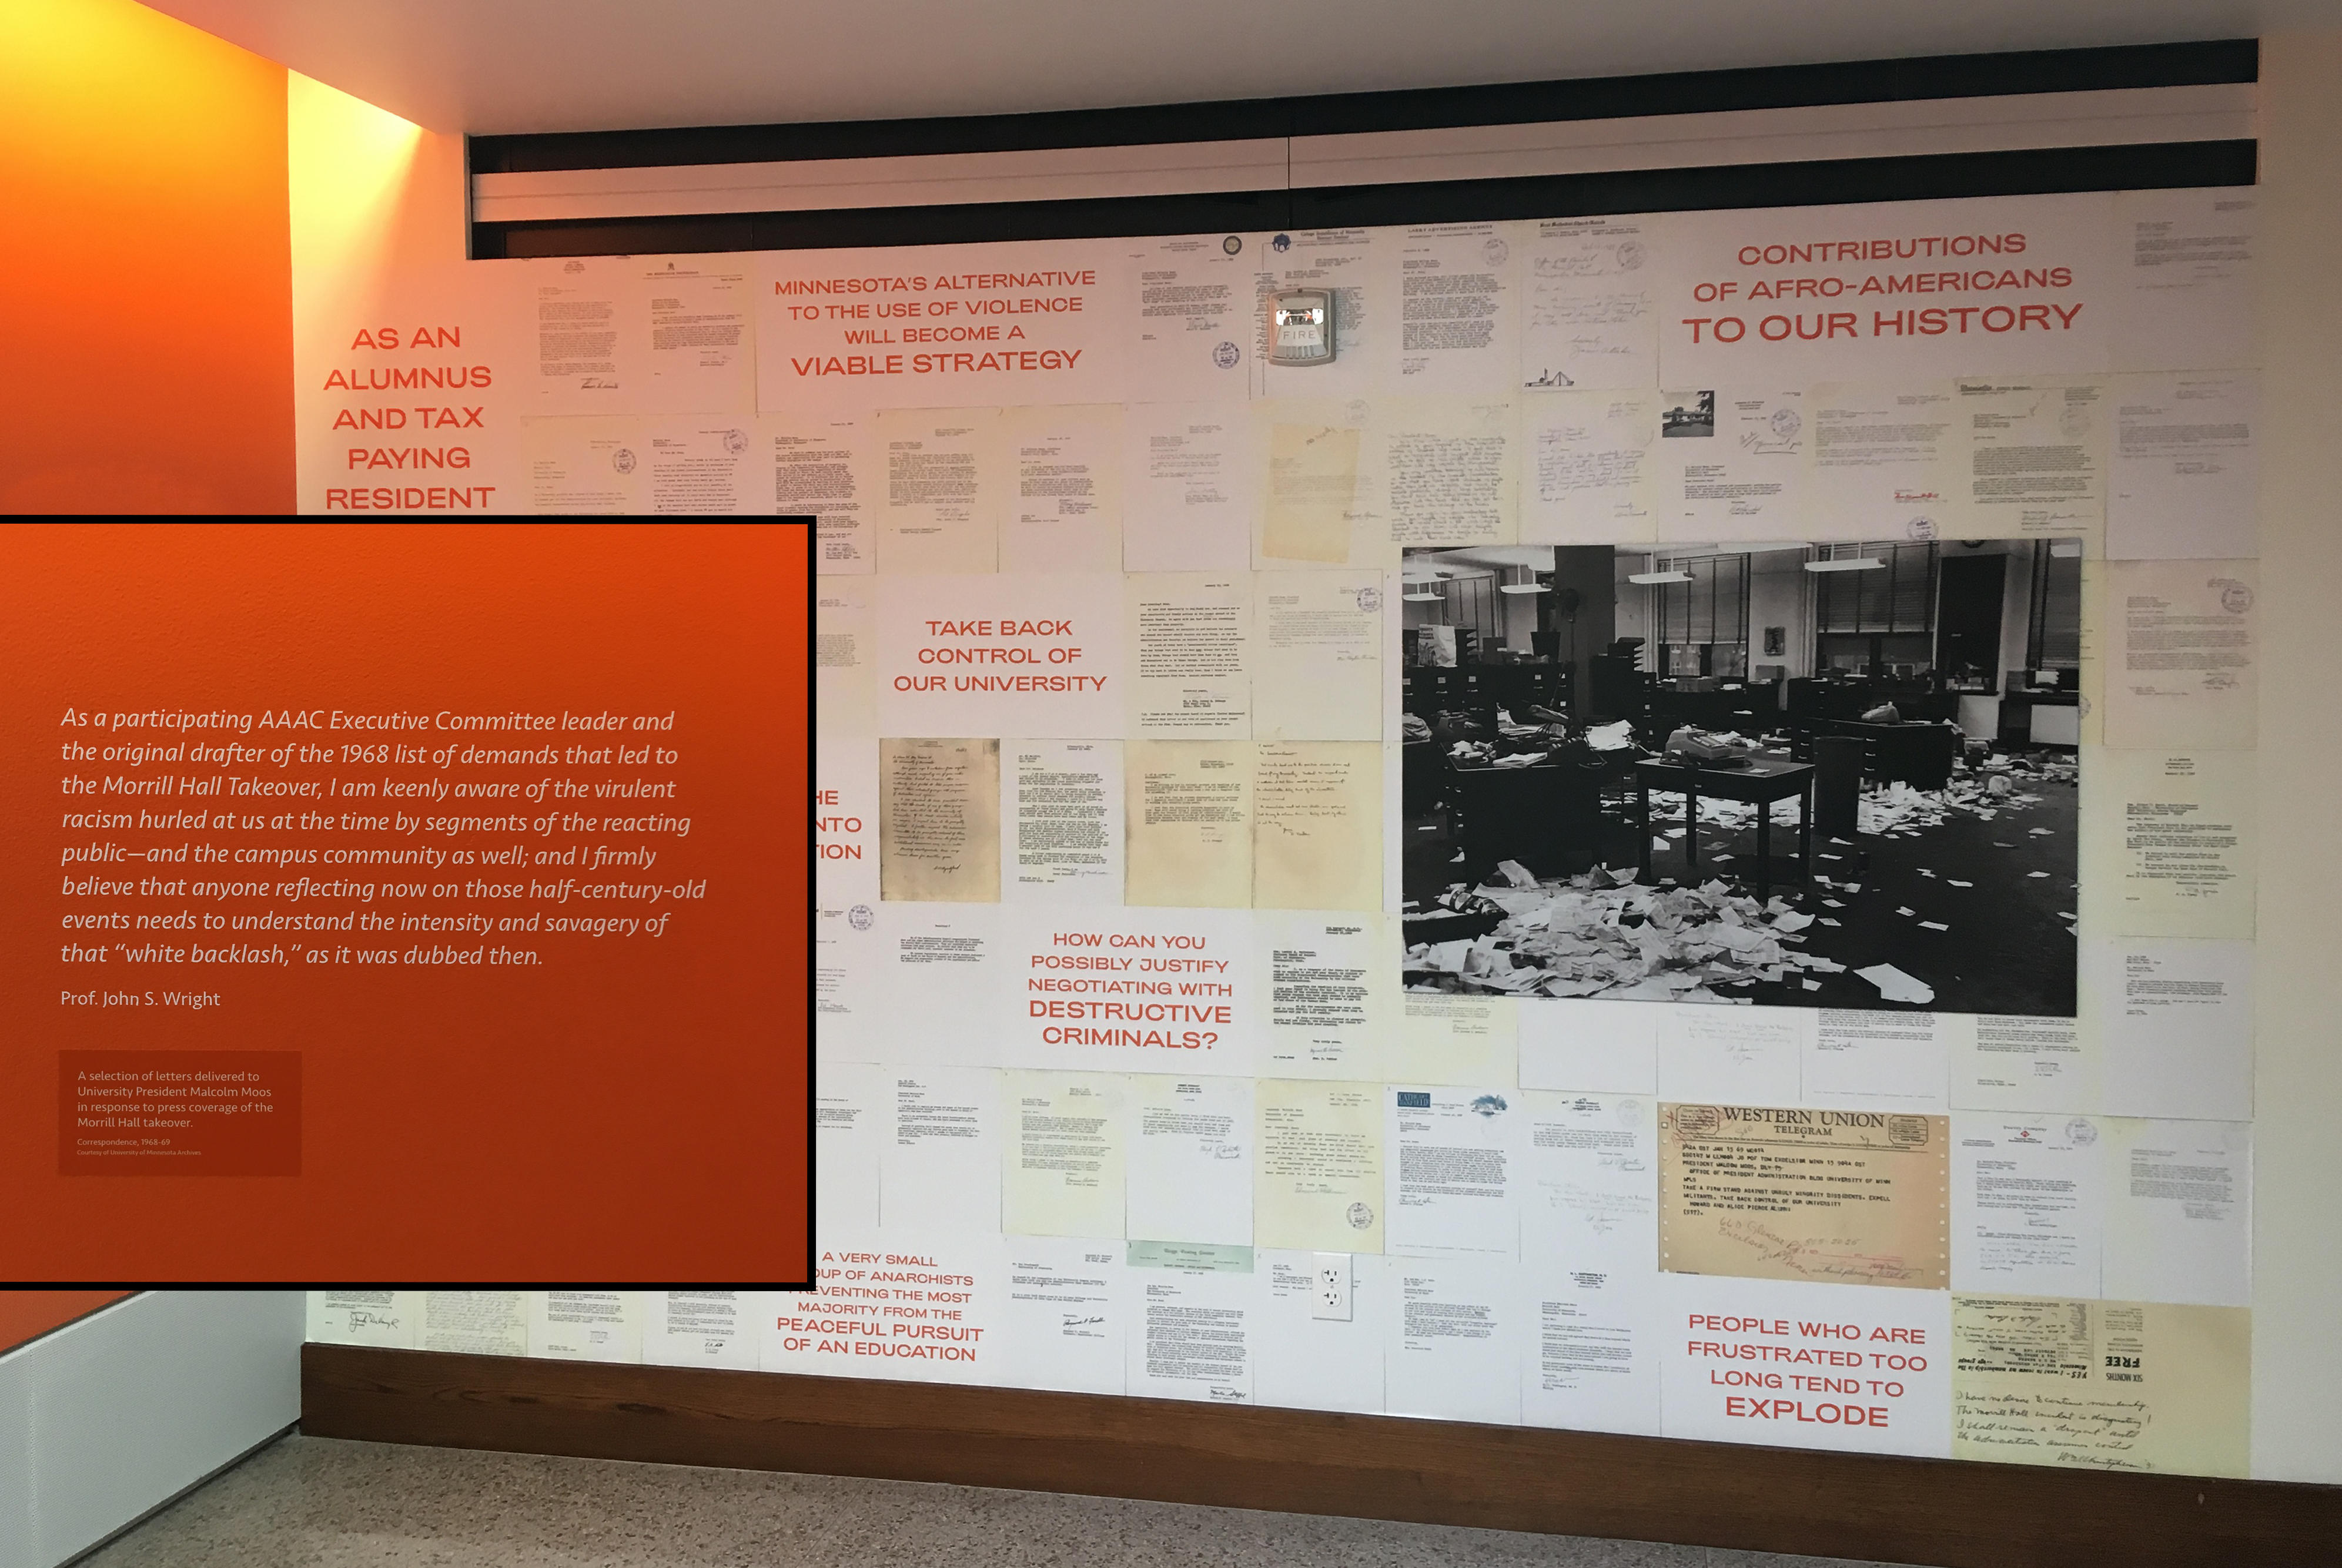 Takeover: Morrill Hall 1969 exhibit